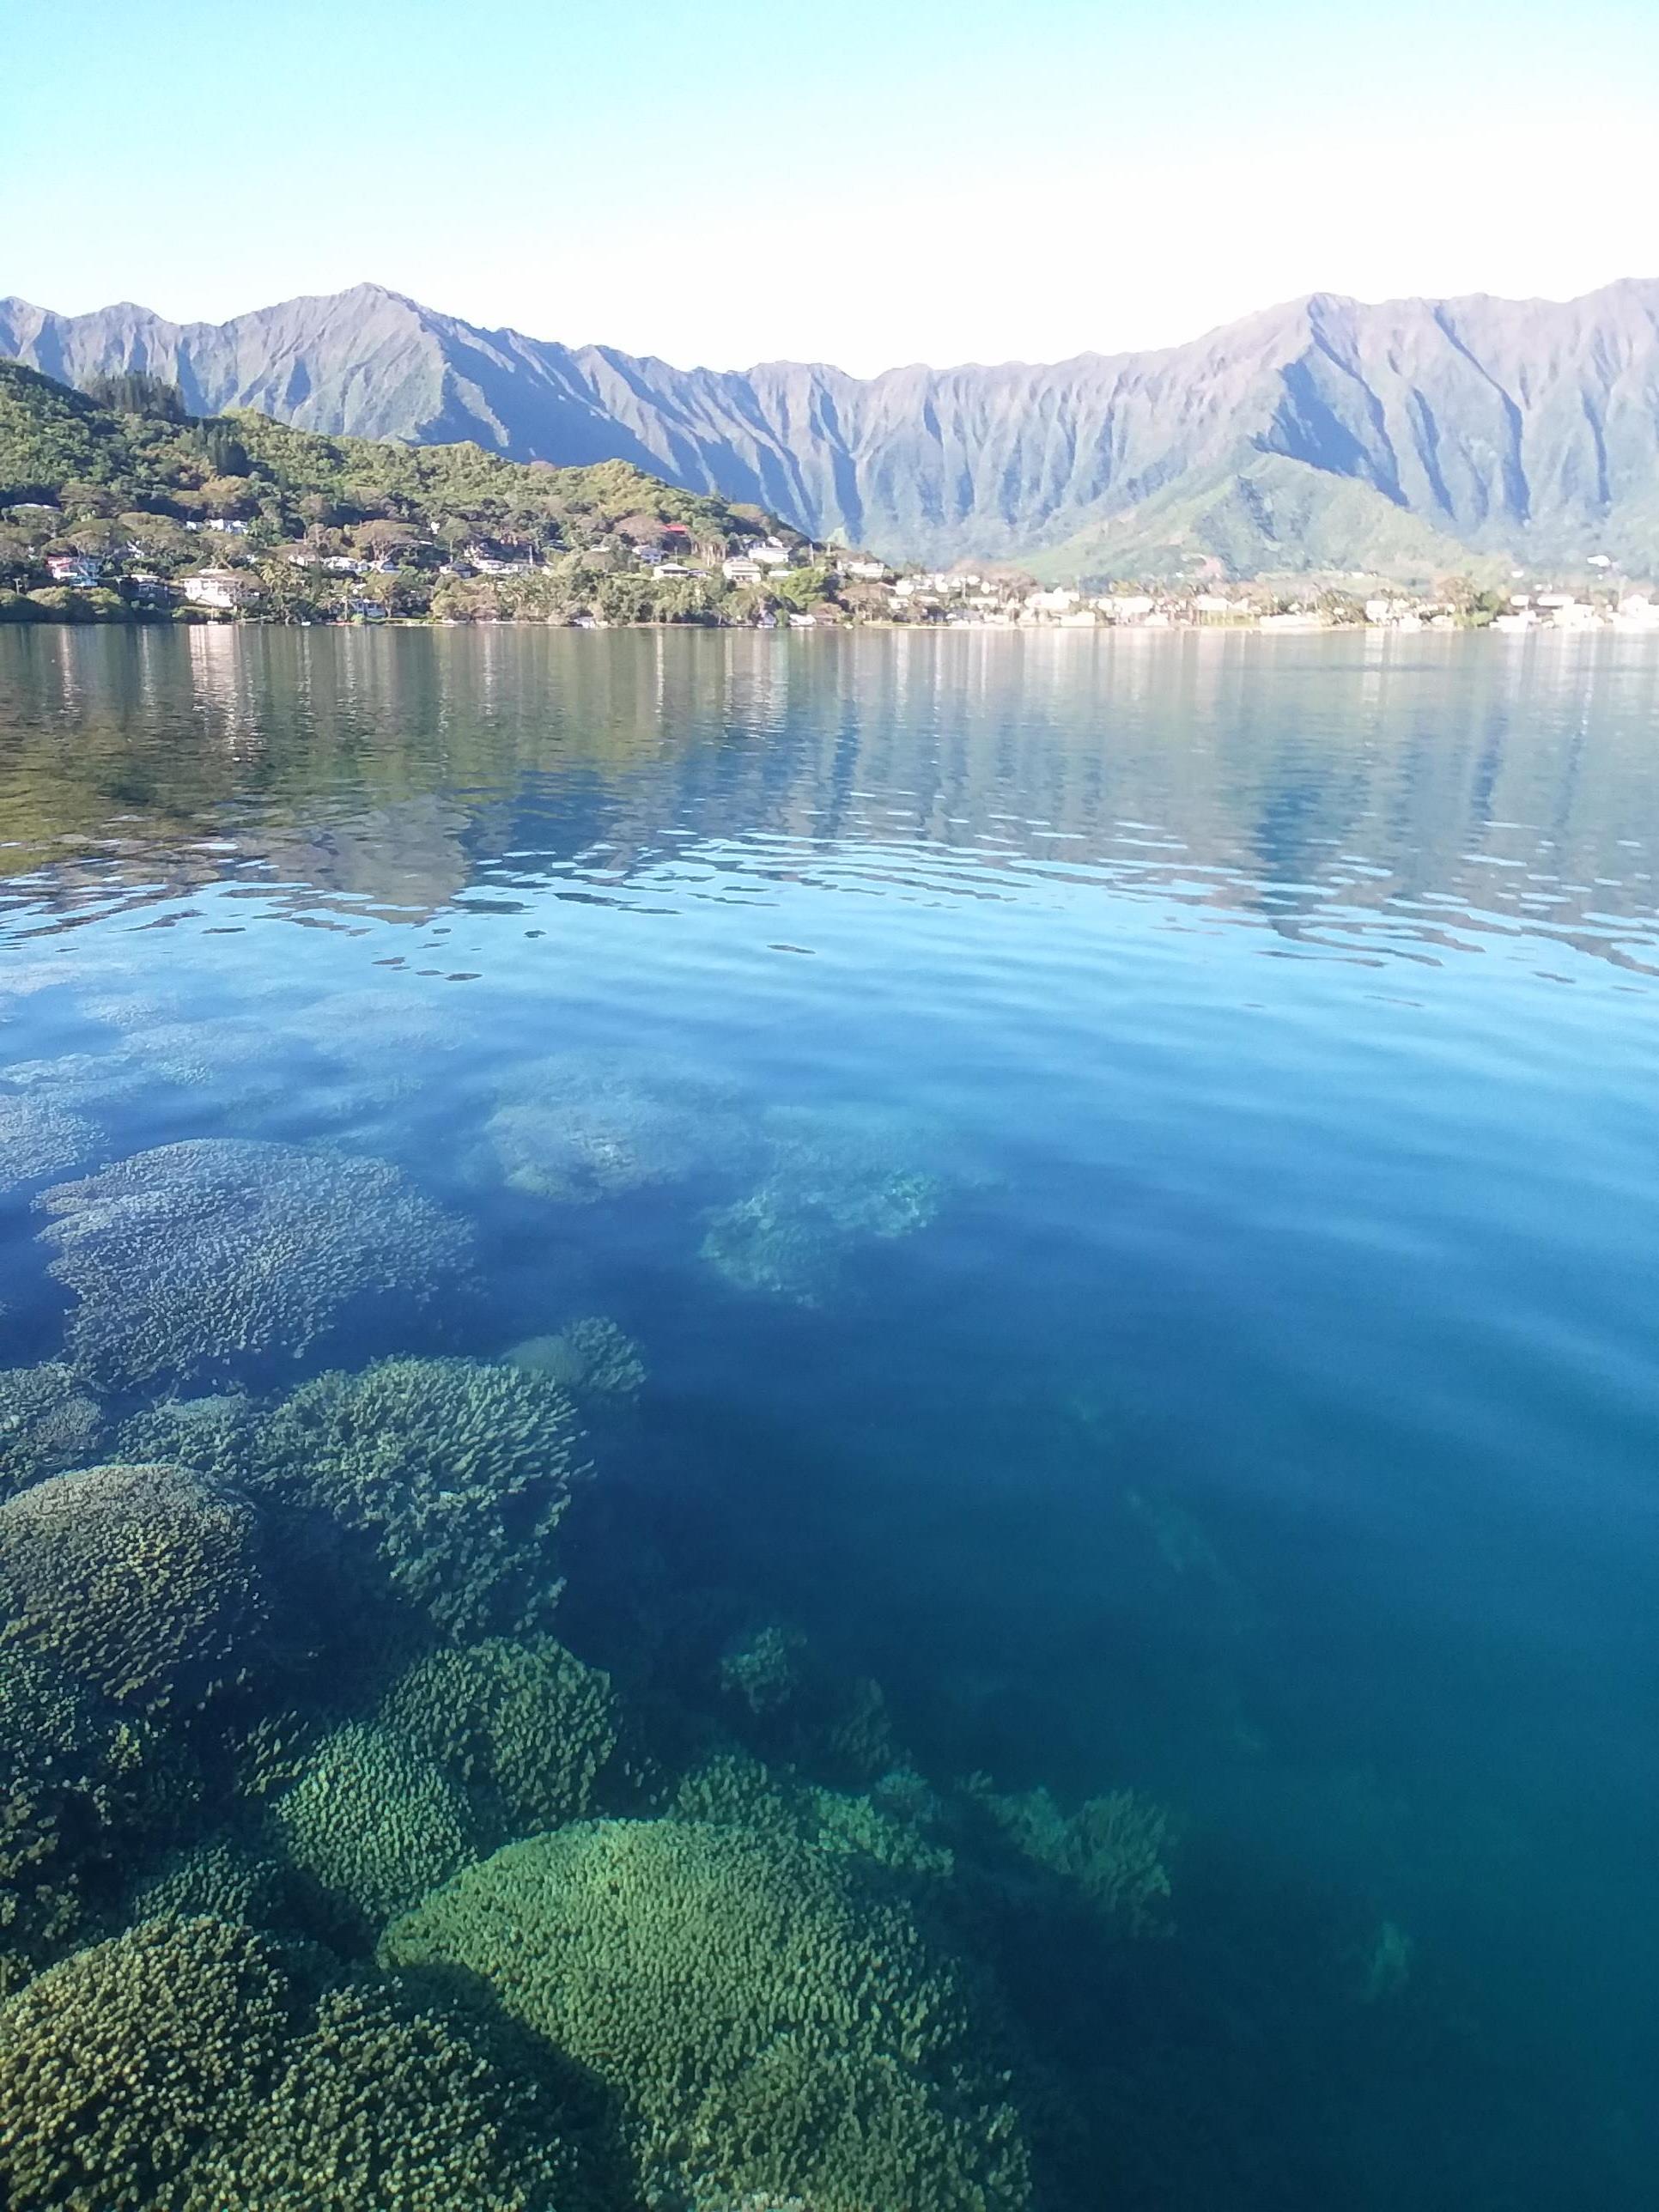 Corals are seen submerged in the foreground, under clear blue-green water. In the background, a view of some of Hawaiʻi’s white sandy beaches, lush green hillsides and brown mountain tops.